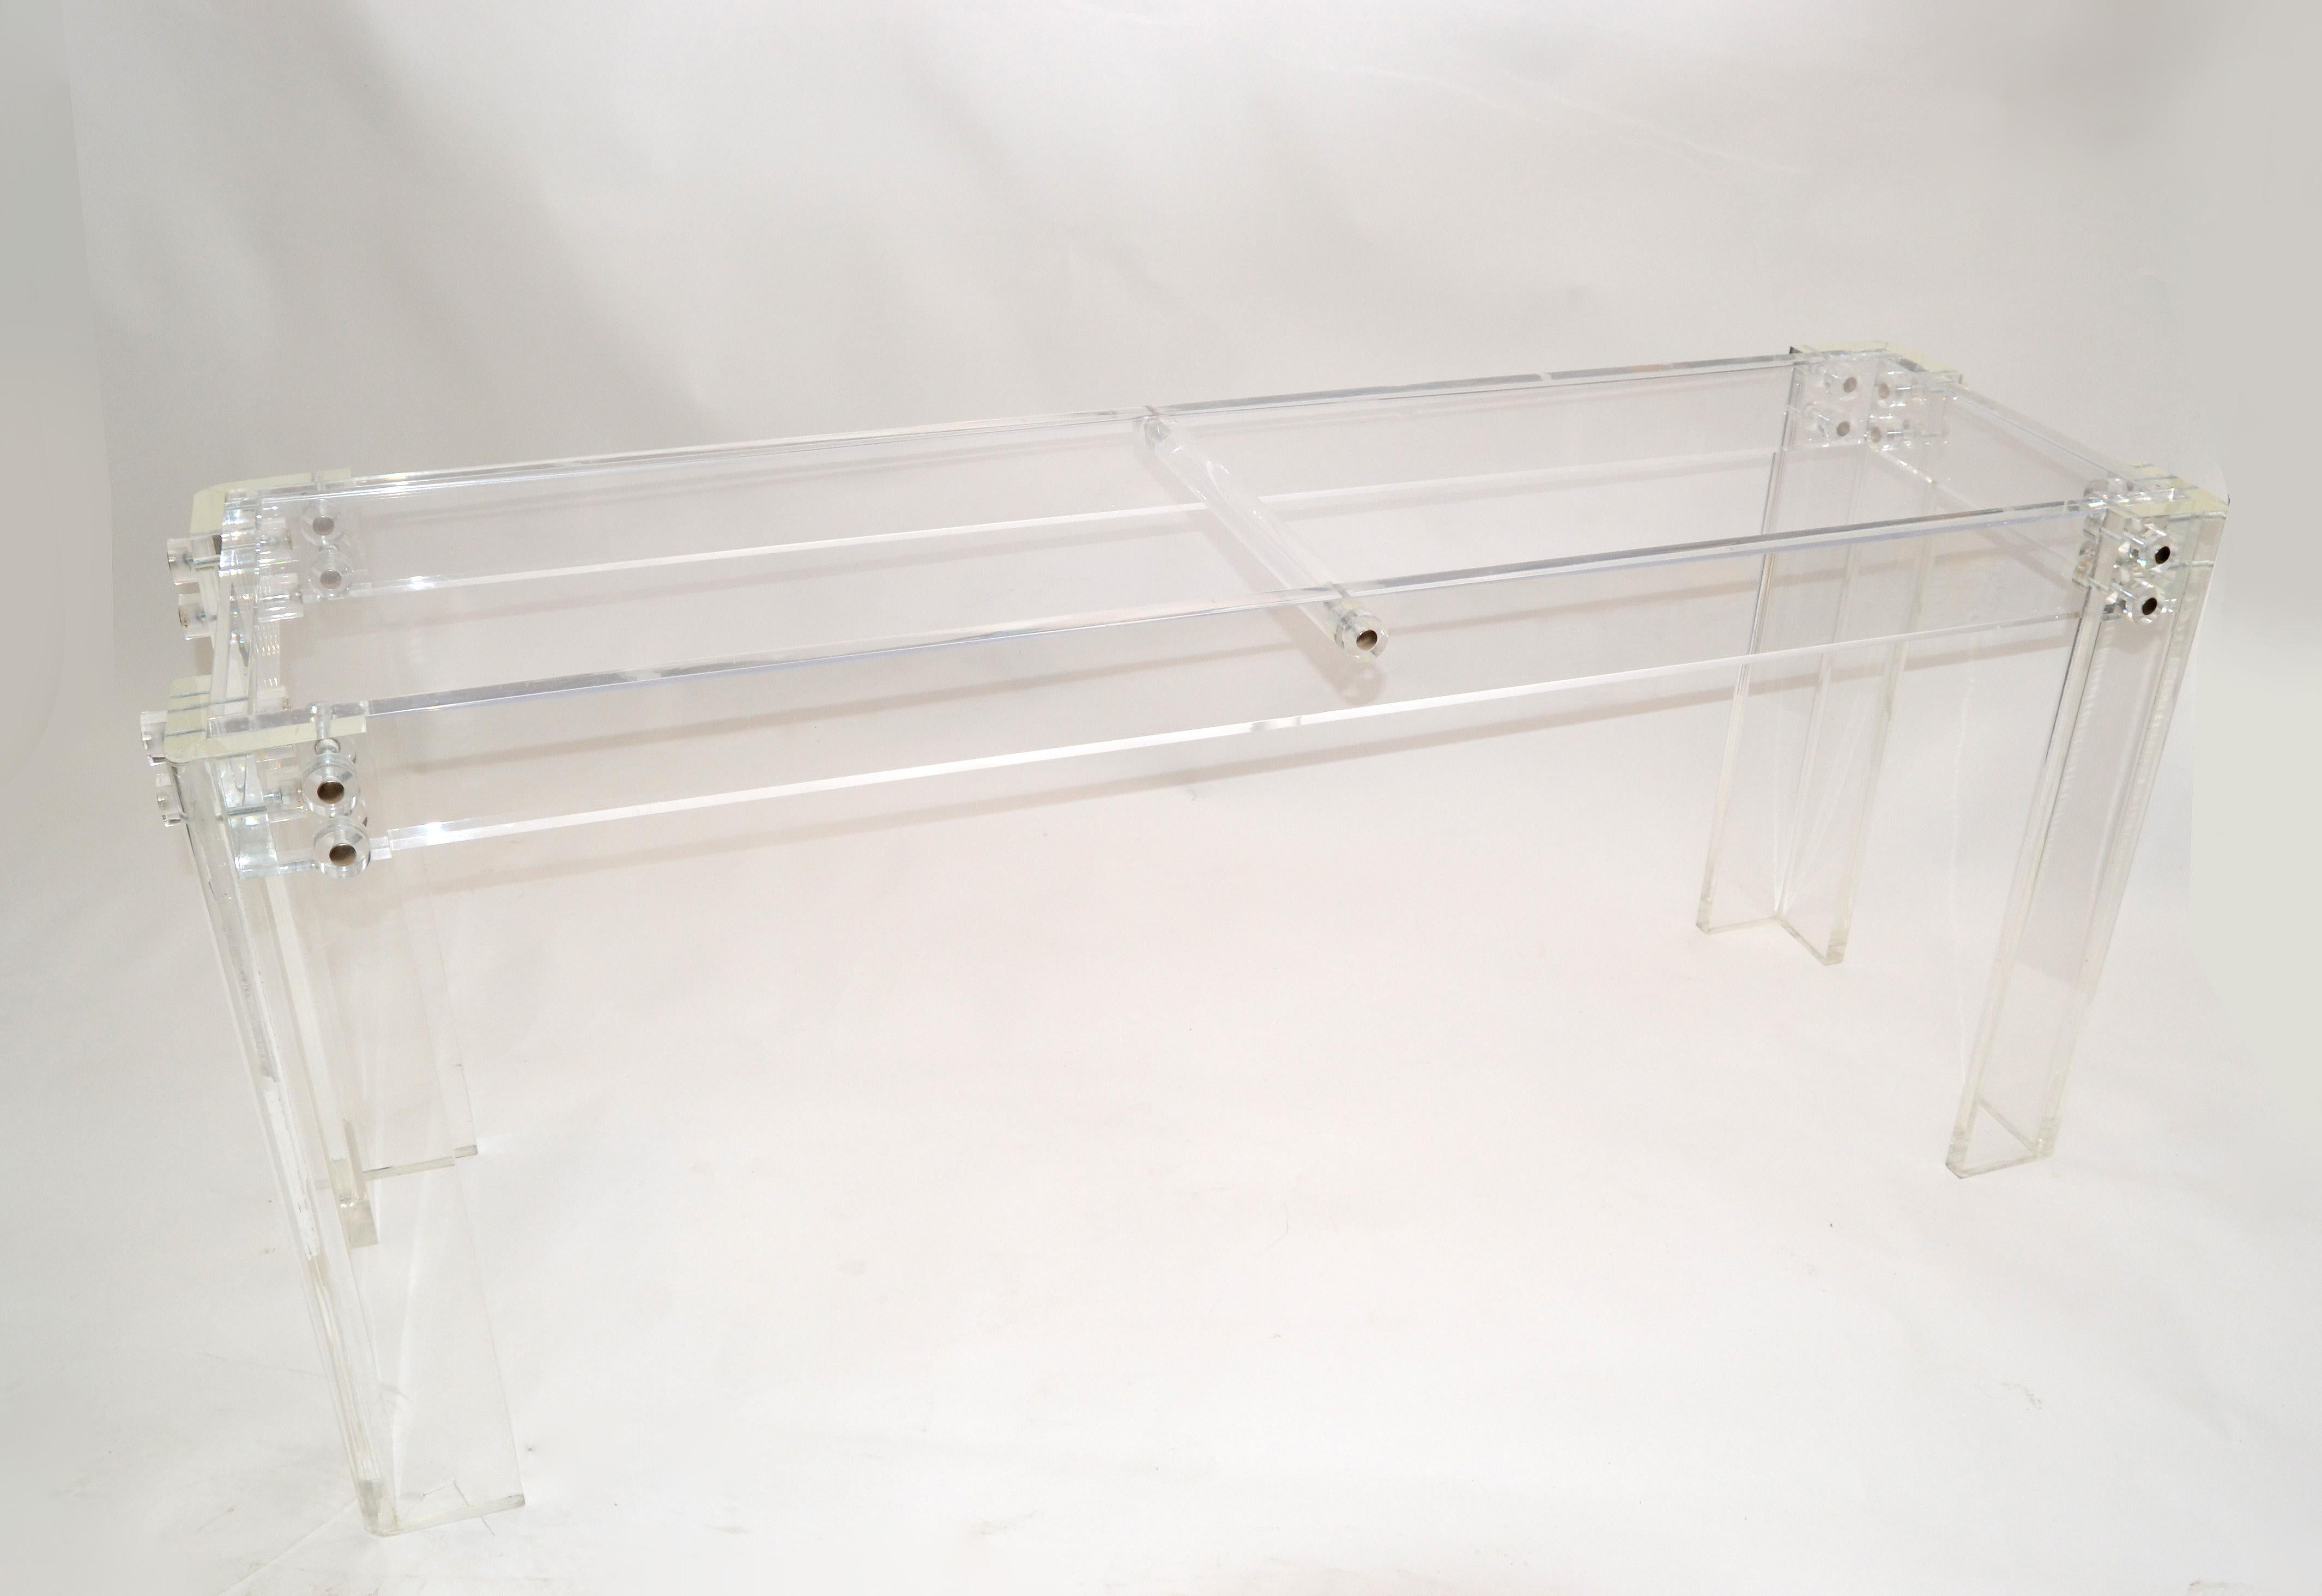 Contemporary long clear Lucite console or hallway table made in the 1980s.
It has a acrylic top for display your finest art and sculptures.
Fits to any Mid-Century Modern design and interior.
The vases are decoration and not included.